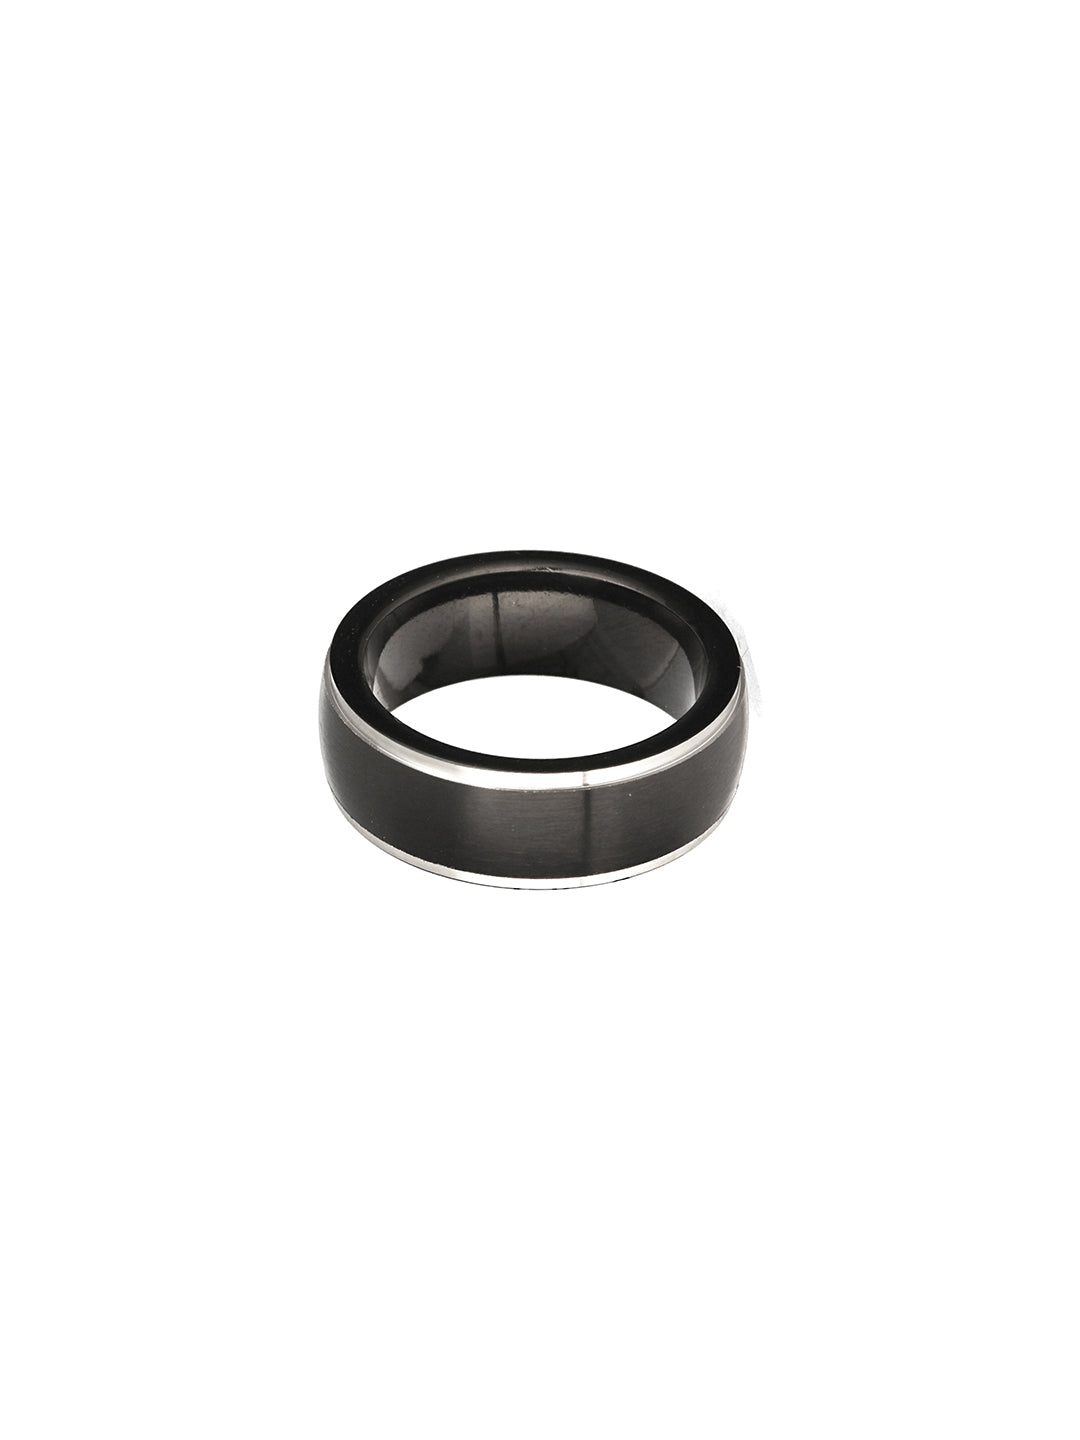 Jazz And Sizzle Men Platinum-Plated Black & Silver-Toned Stainless Steel Finger Ring - Jazzandsizzle